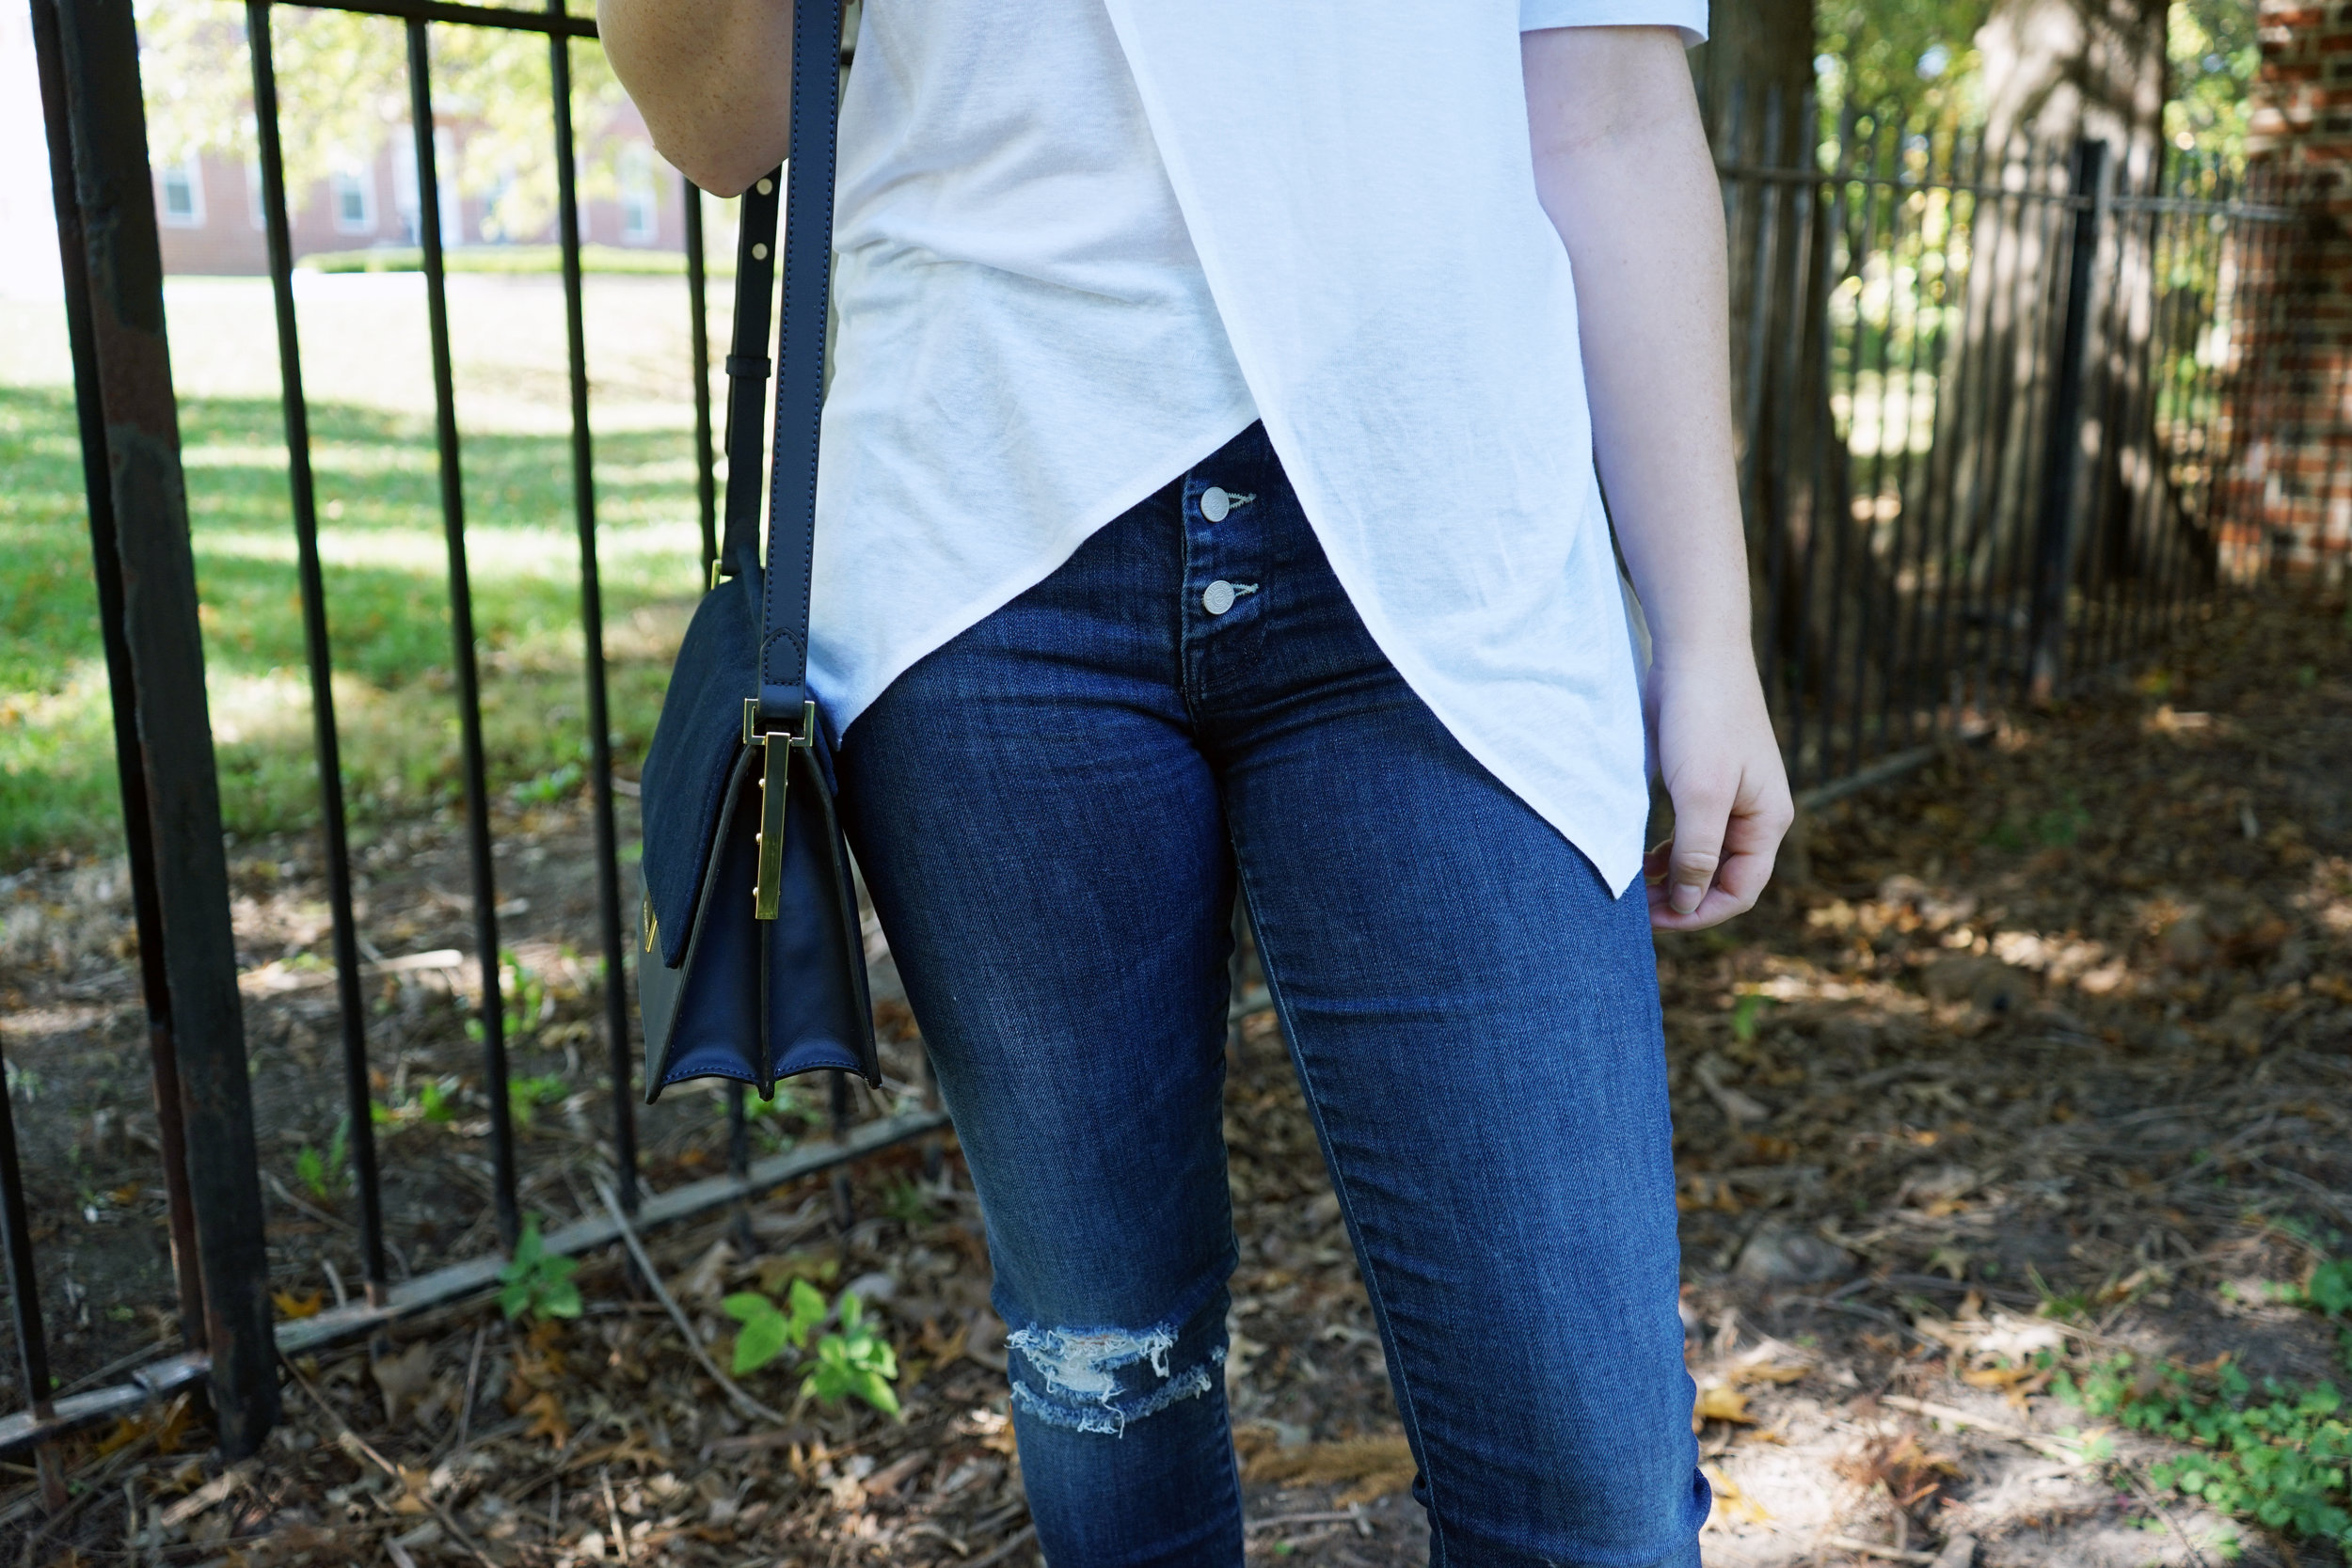 Maggie a la Mode - Not So Basic Jeans and a Tee 1.JPG